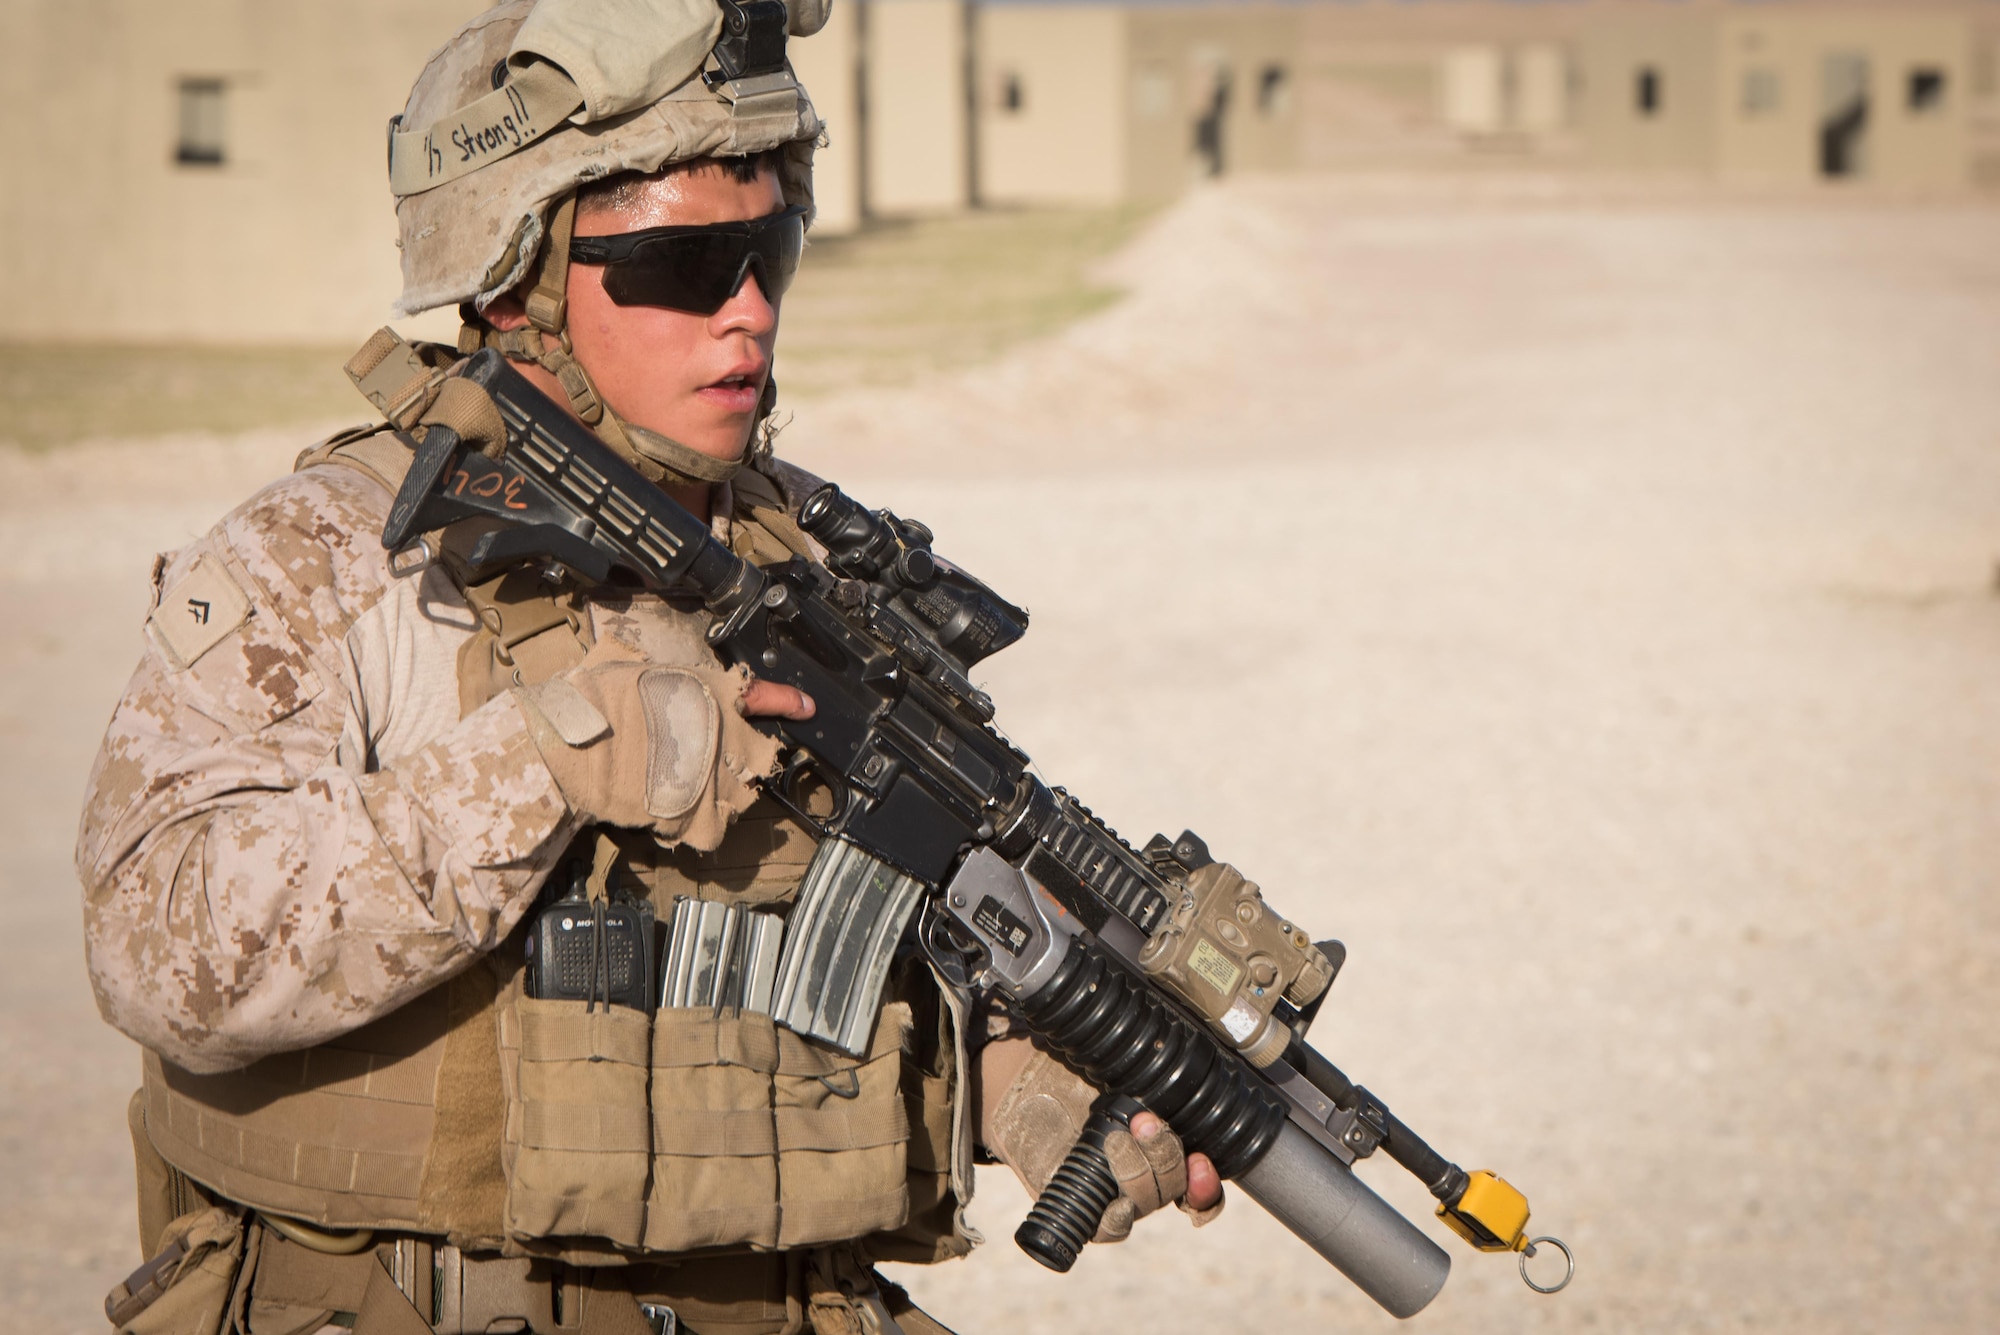 A U.S. Marine assigned to 1st Battalion, 7th Marine Regiment, Special Purpose Marine Air-Ground Task Force-Crisis Response-Central Command posts as security during a tactical recovery of aircraft and personnel exercise at an undisclosed location in Southwest Asia, April 5, 2017.  Marines with 1/7 compose the ground combat element, to include the dedicated TRAP force, for SPMAGTF-CR-CC within the USCENTCOM area of operations, spanning 20 countries. SPMAGTF-CR-CC is currently forward deployed to several host nations, with the ability to respond to a variety of contingencies rapidly and effectively. (U.S. Air Force photo/Master Sgt. Benjamin Wilson)(Released)